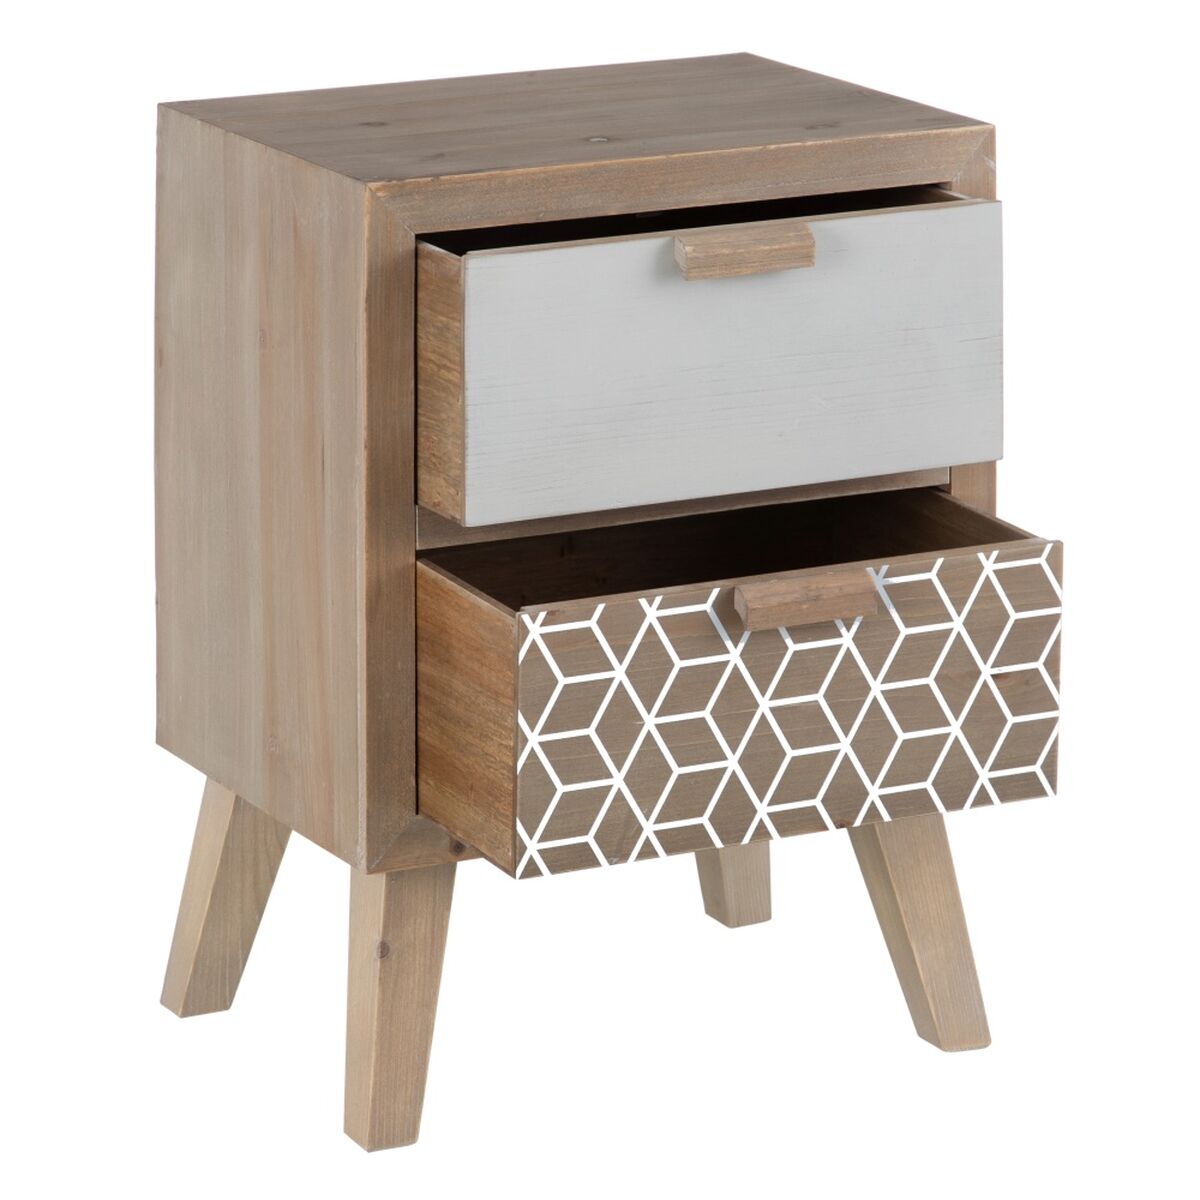 Natural White Bedside Table with Geometric Drawer (40 x 30 x 55 cm)